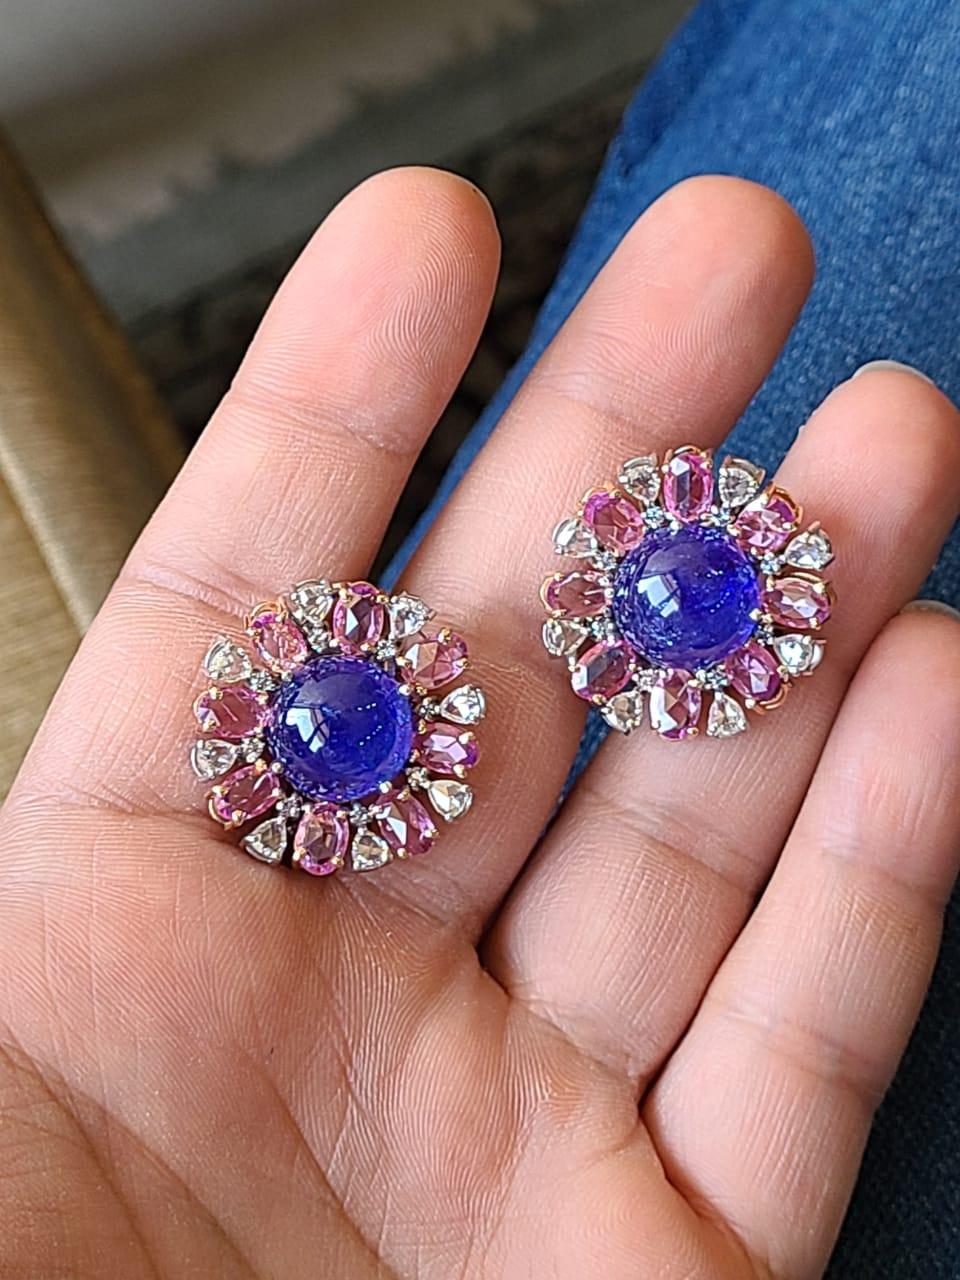 A very bold and beautiful pair of Tanzanite & Pink Sapphire Stud Earrings set in 18K White Gold & Diamonds. The weight of the Tanzanite Cabochons is 20.63 carats. The Tanzanites are responsibly sourced from Tanzania. The weight of the Pink Sapphires